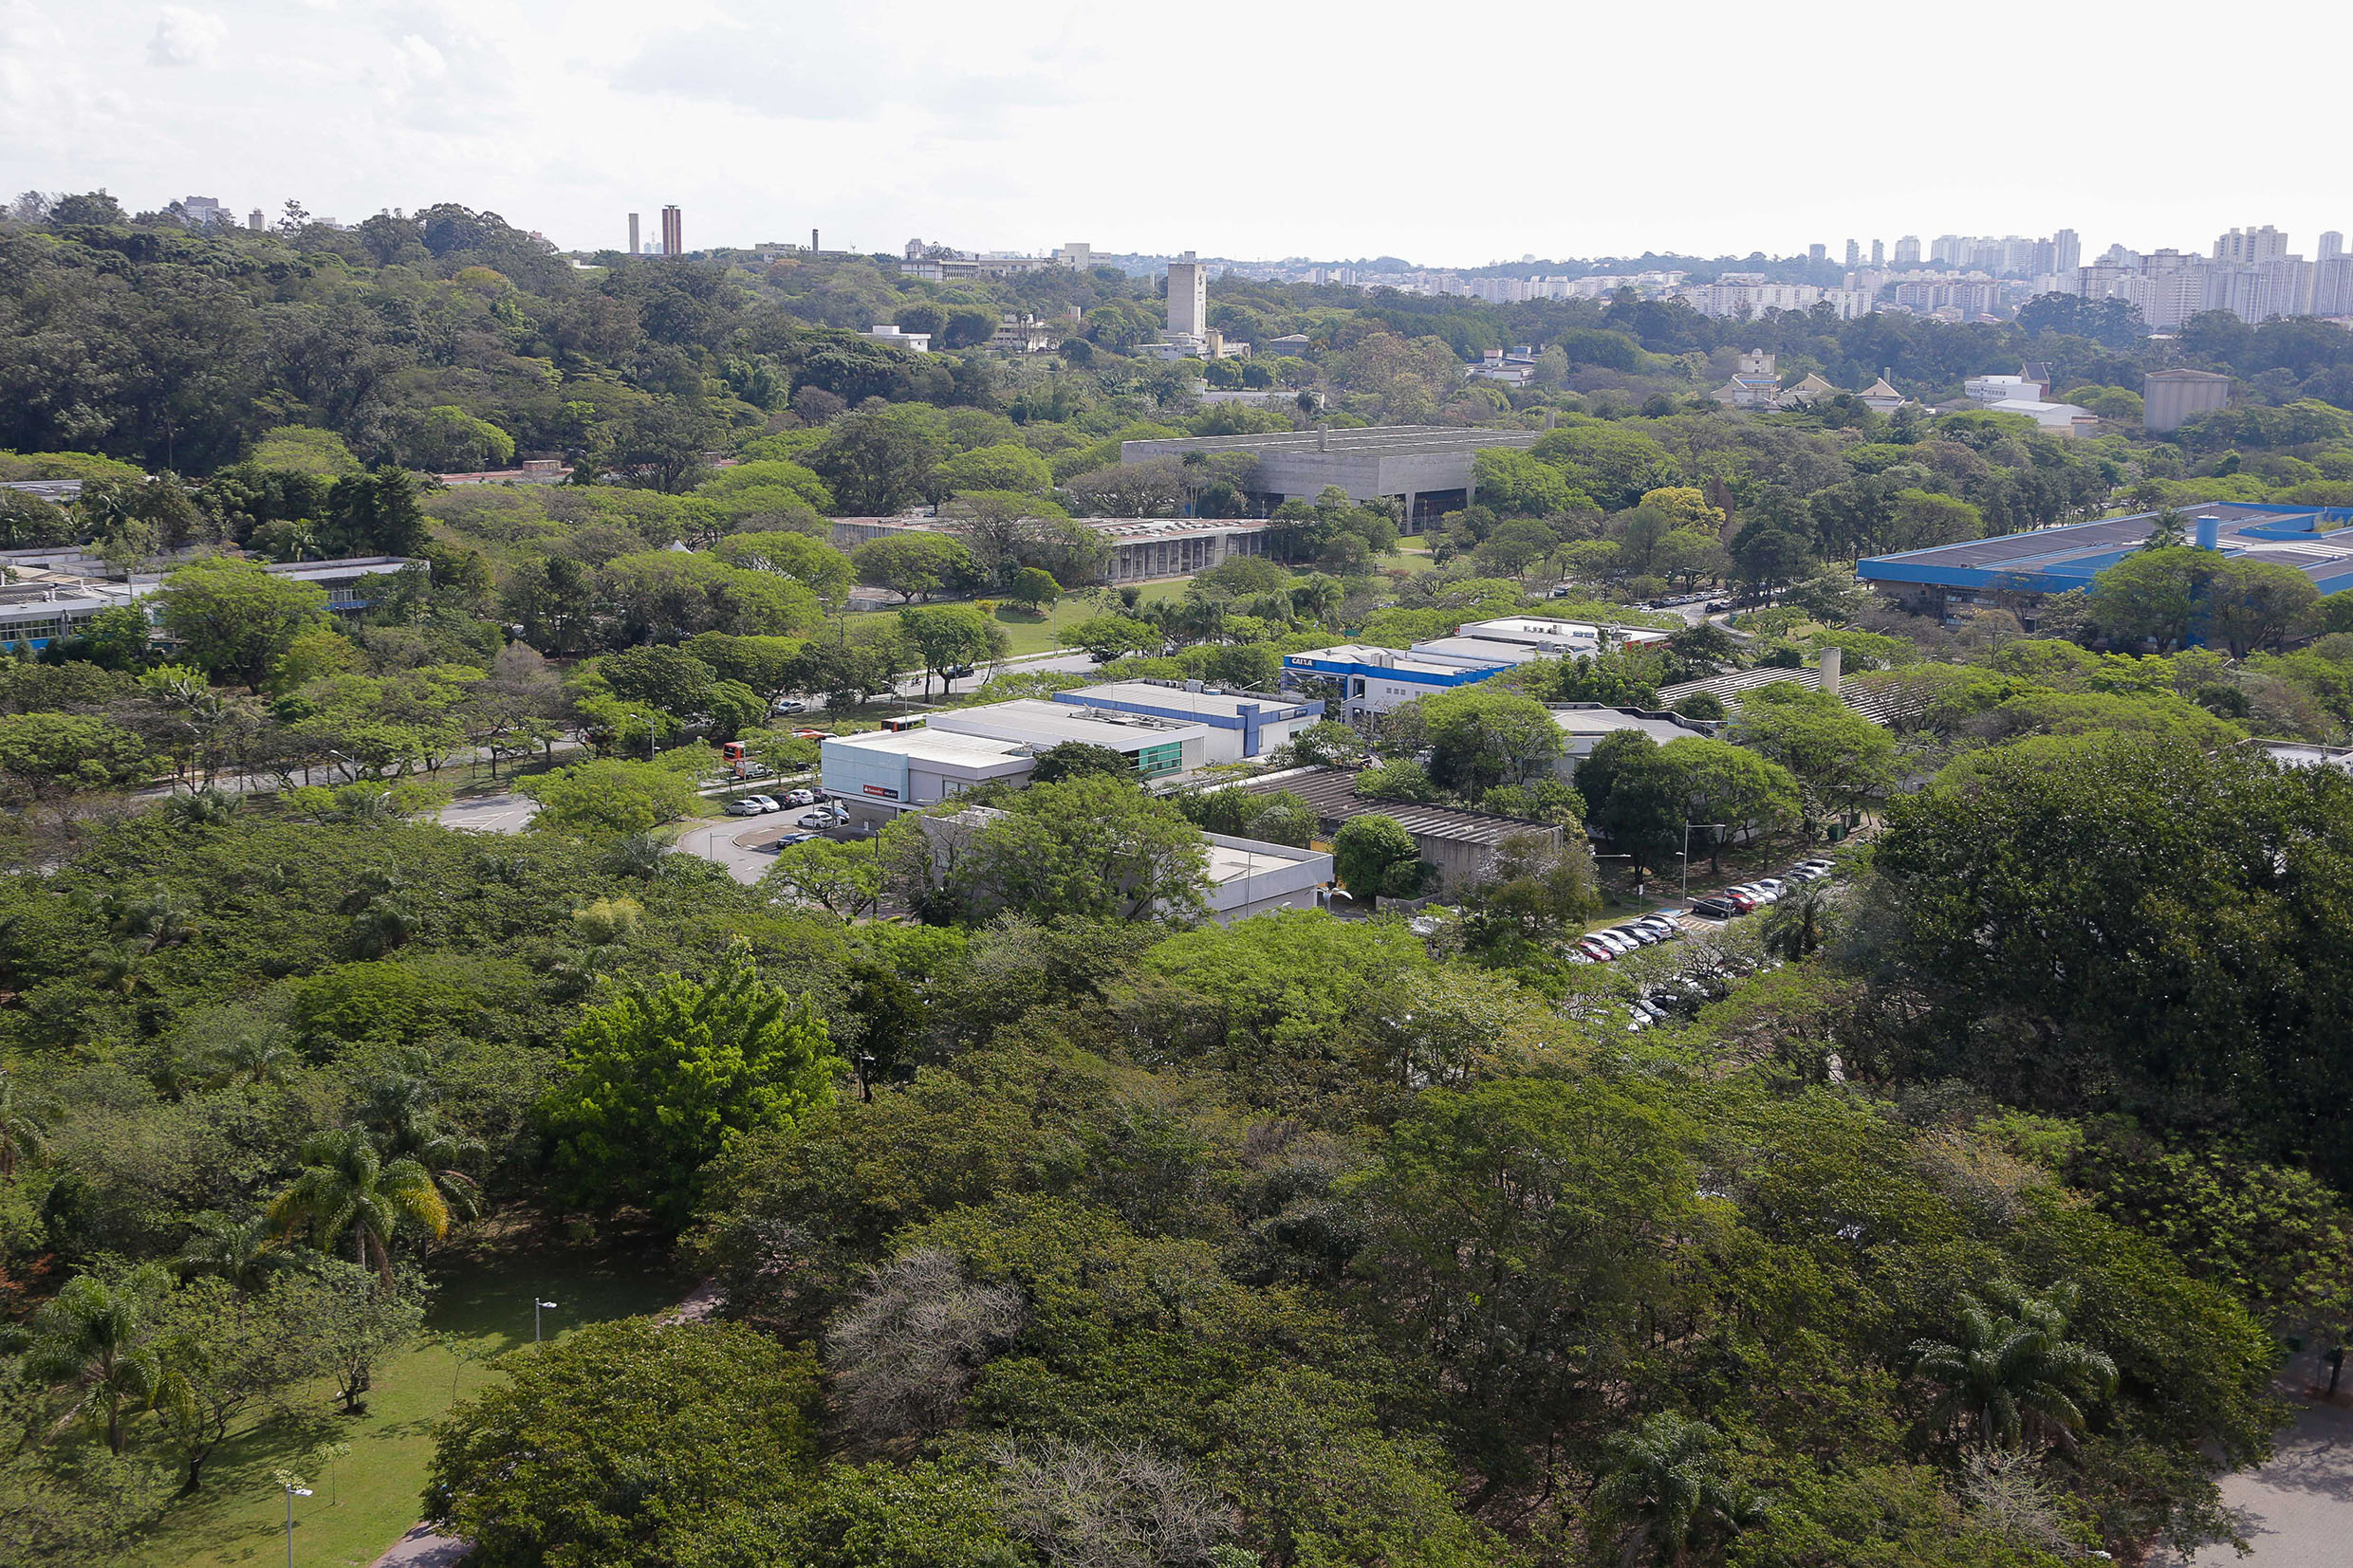 Vista do Campus<a style='float:right' href='https://www3.al.sp.gov.br/repositorio/noticia/N-01-2021/fg259965.jpg' target=_blank><img src='/_img/material-file-download-white.png' width='14px' alt='Clique para baixar a imagem'></a>